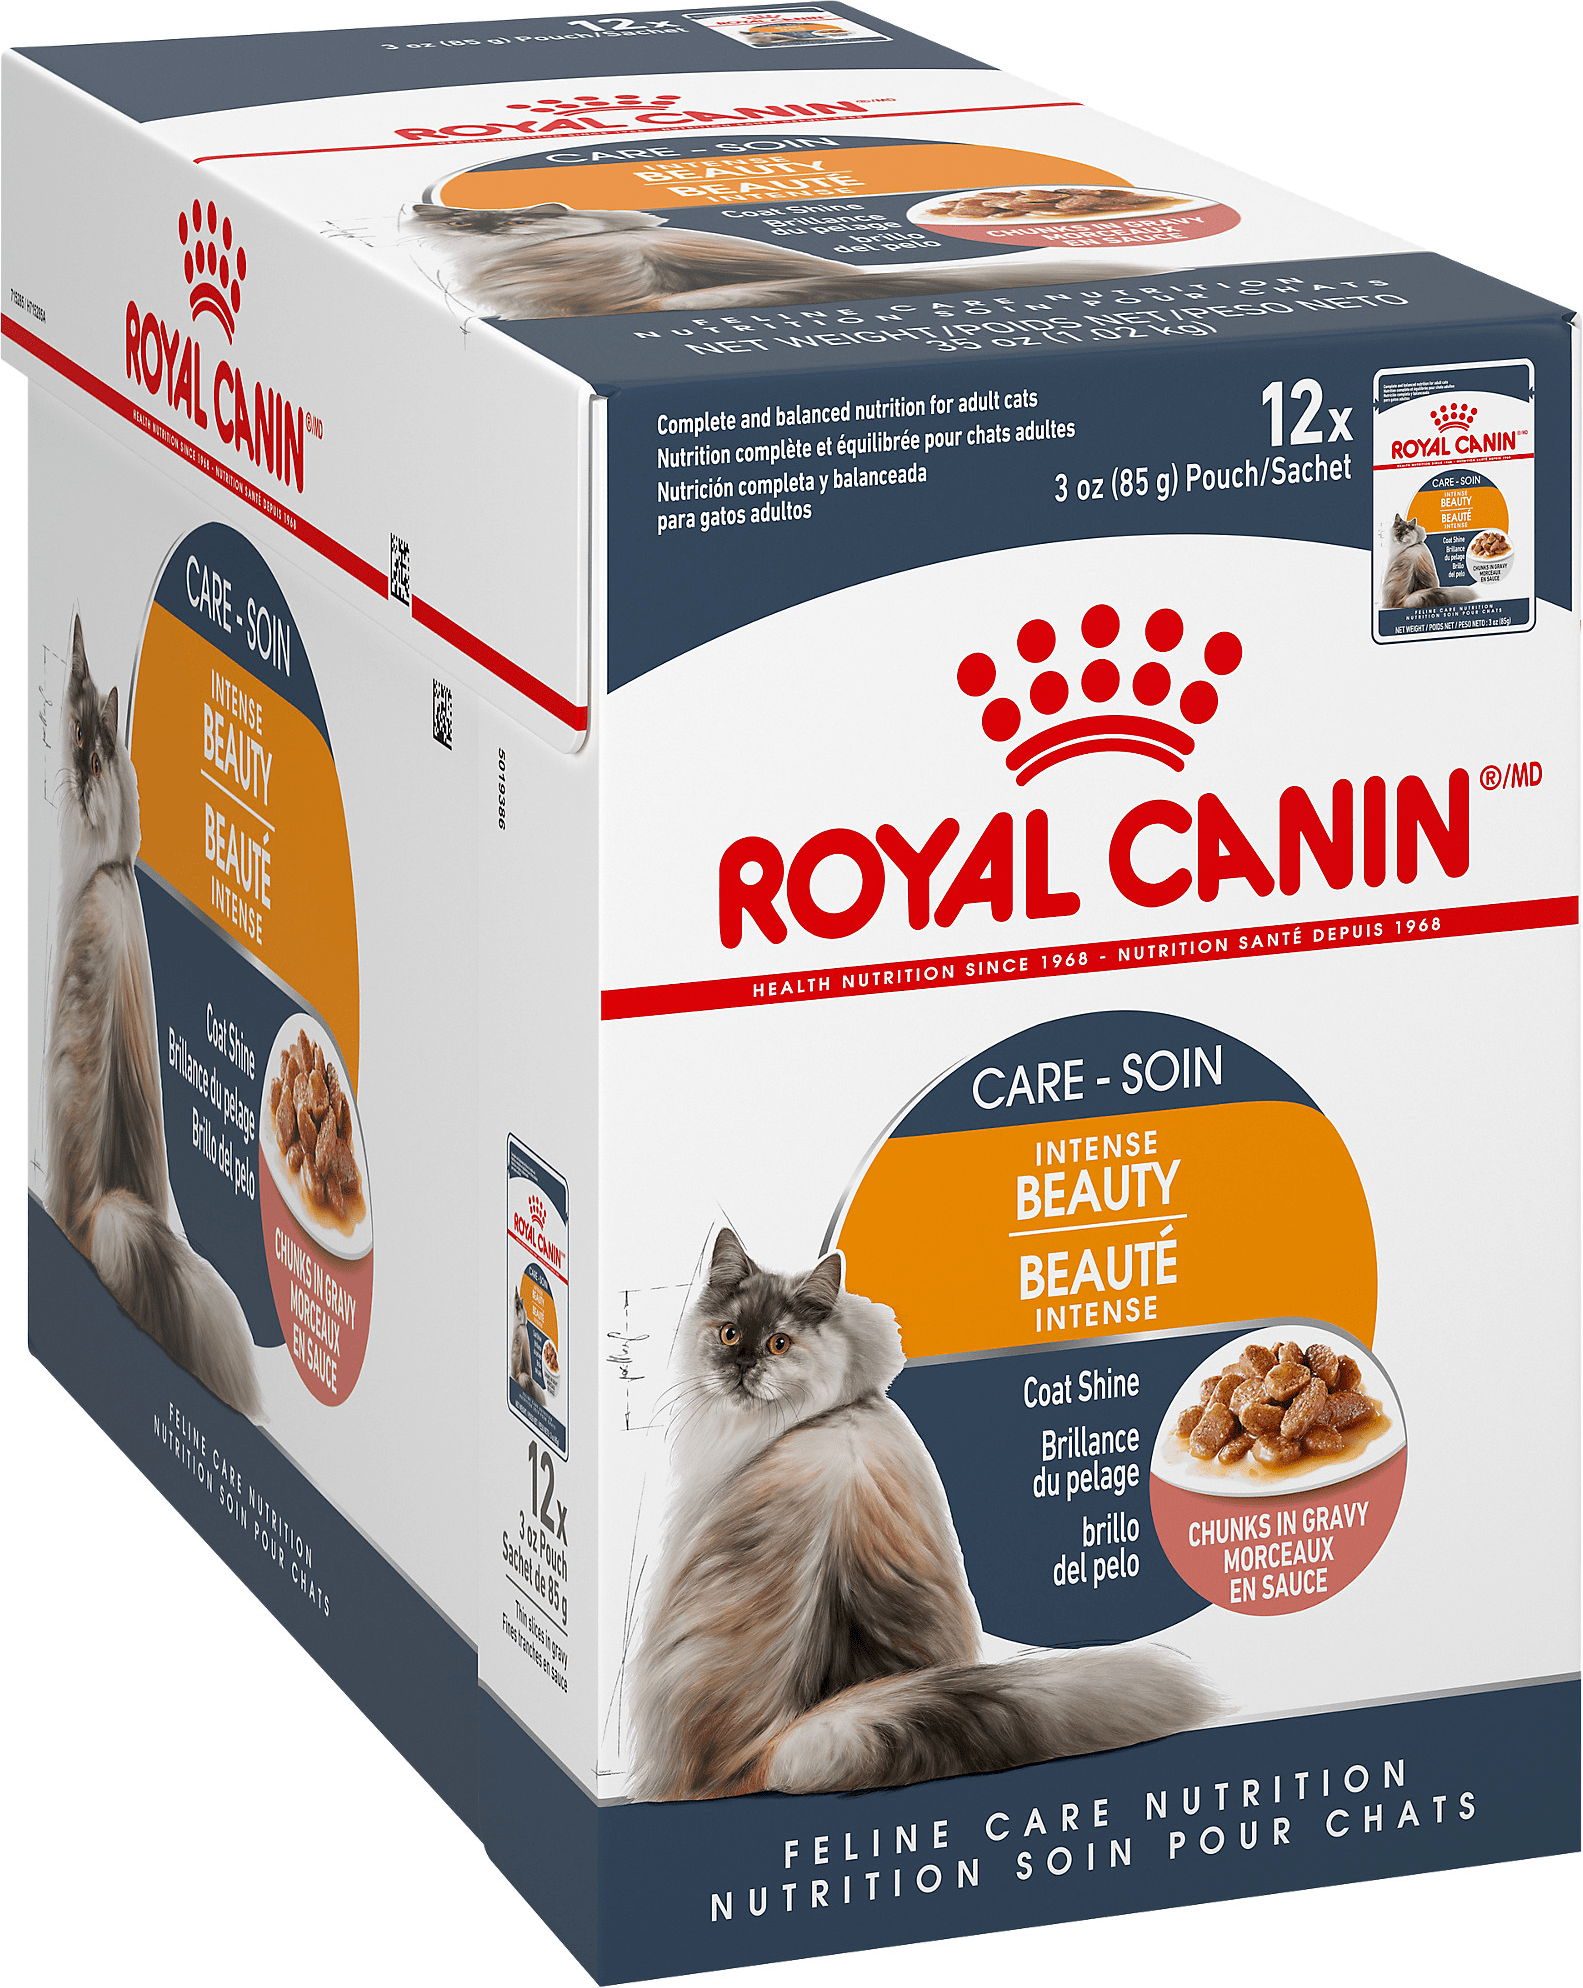 Royal Canin Intense Beauty Pouch Cat Food